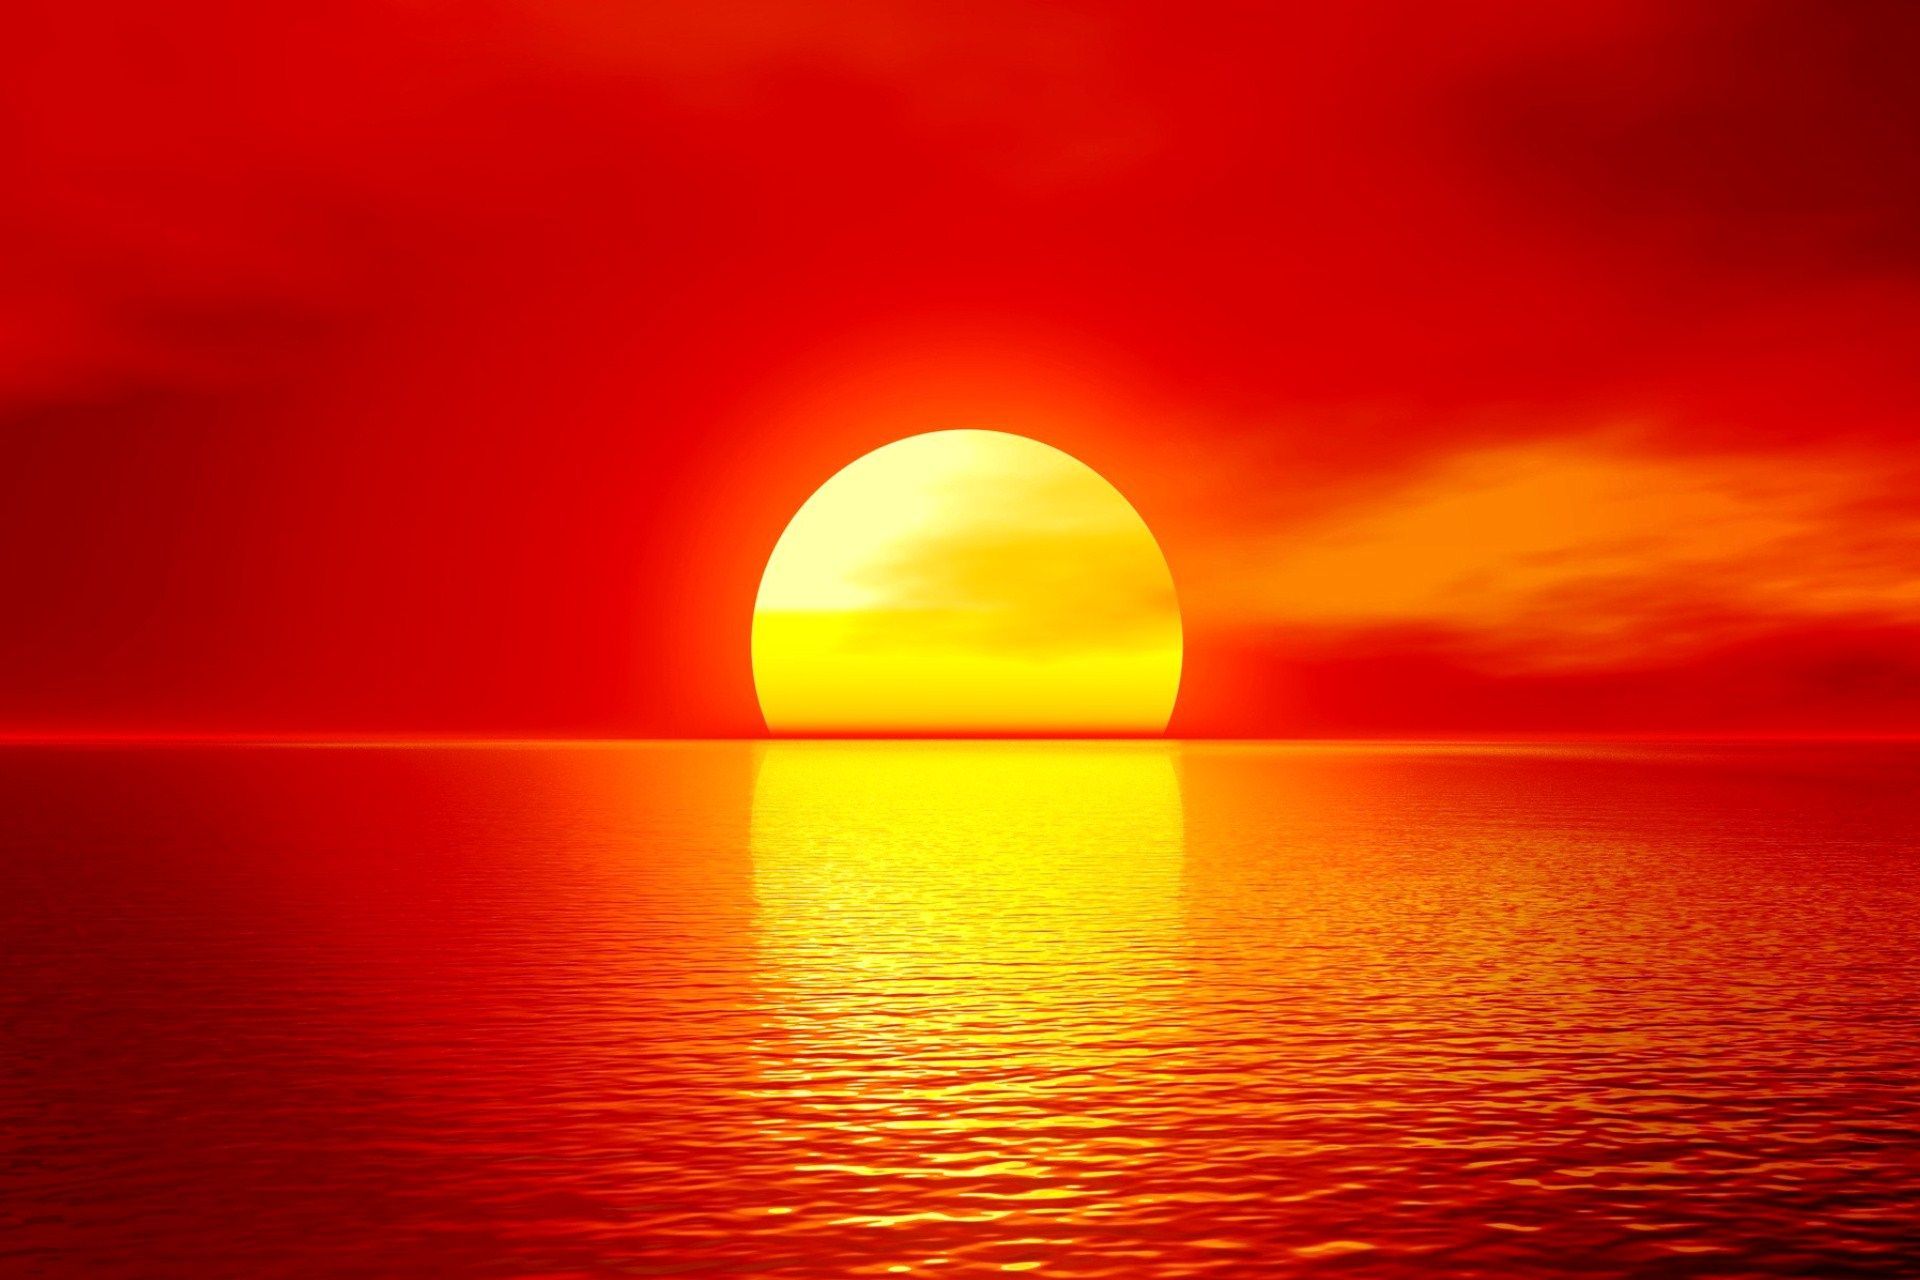 Morning Sun Wallpaper Wallpaper Background of Your Choice. Sunset picture, Sunset wallpaper, Sunrise photography